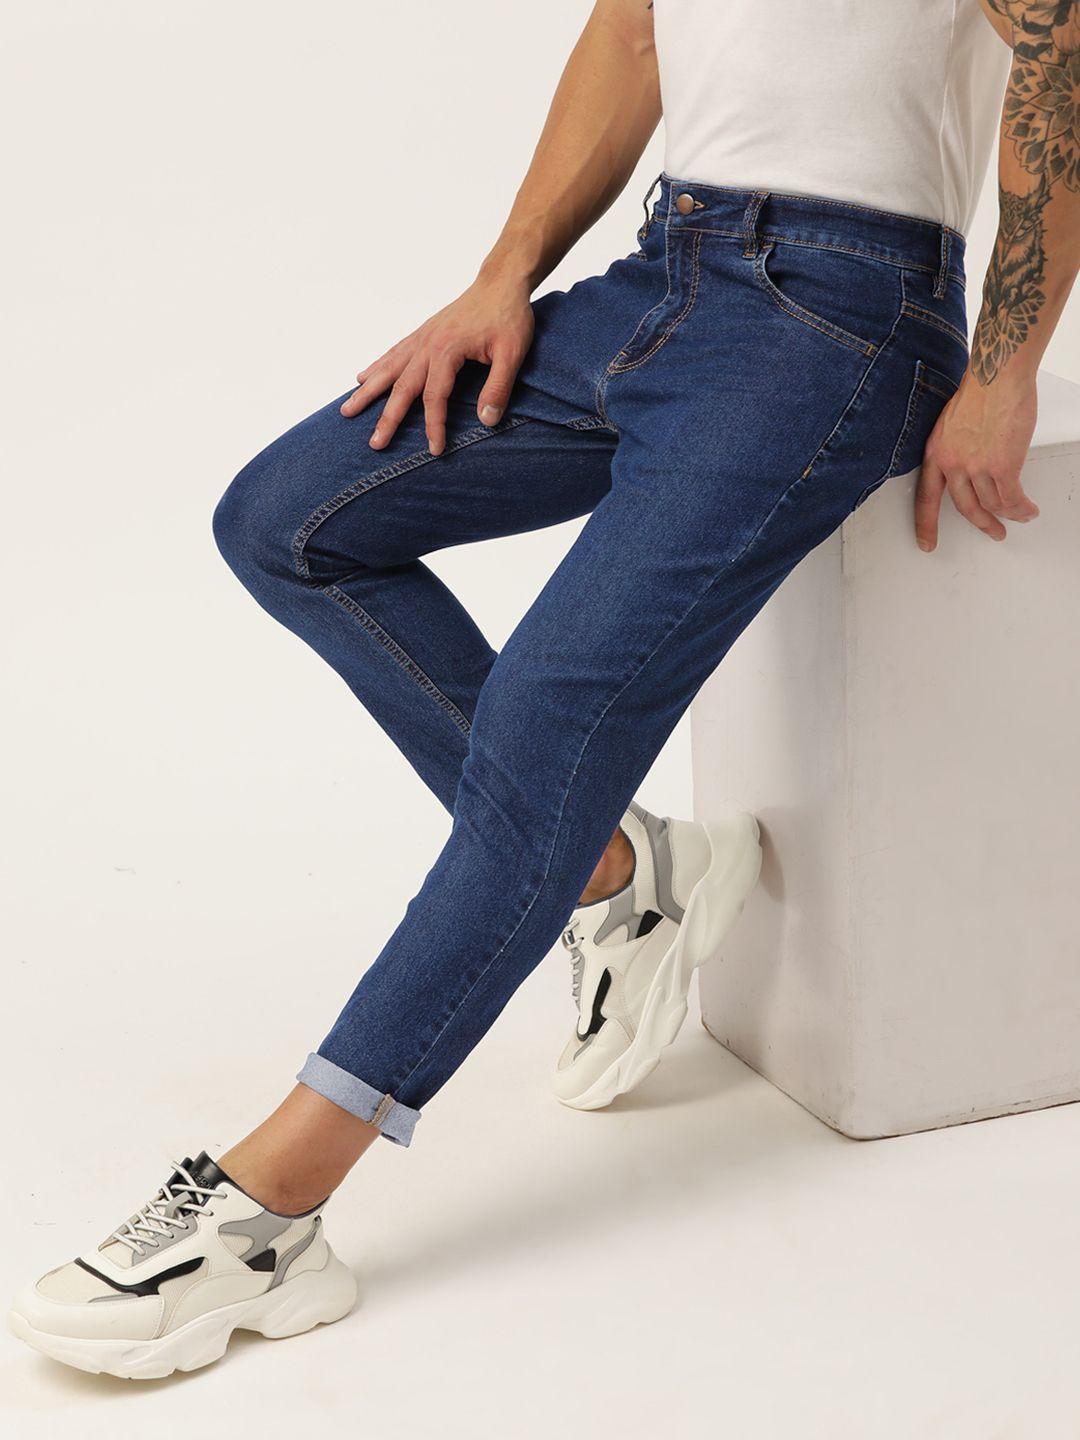 kook n keech men tapered fit stretchable jeans